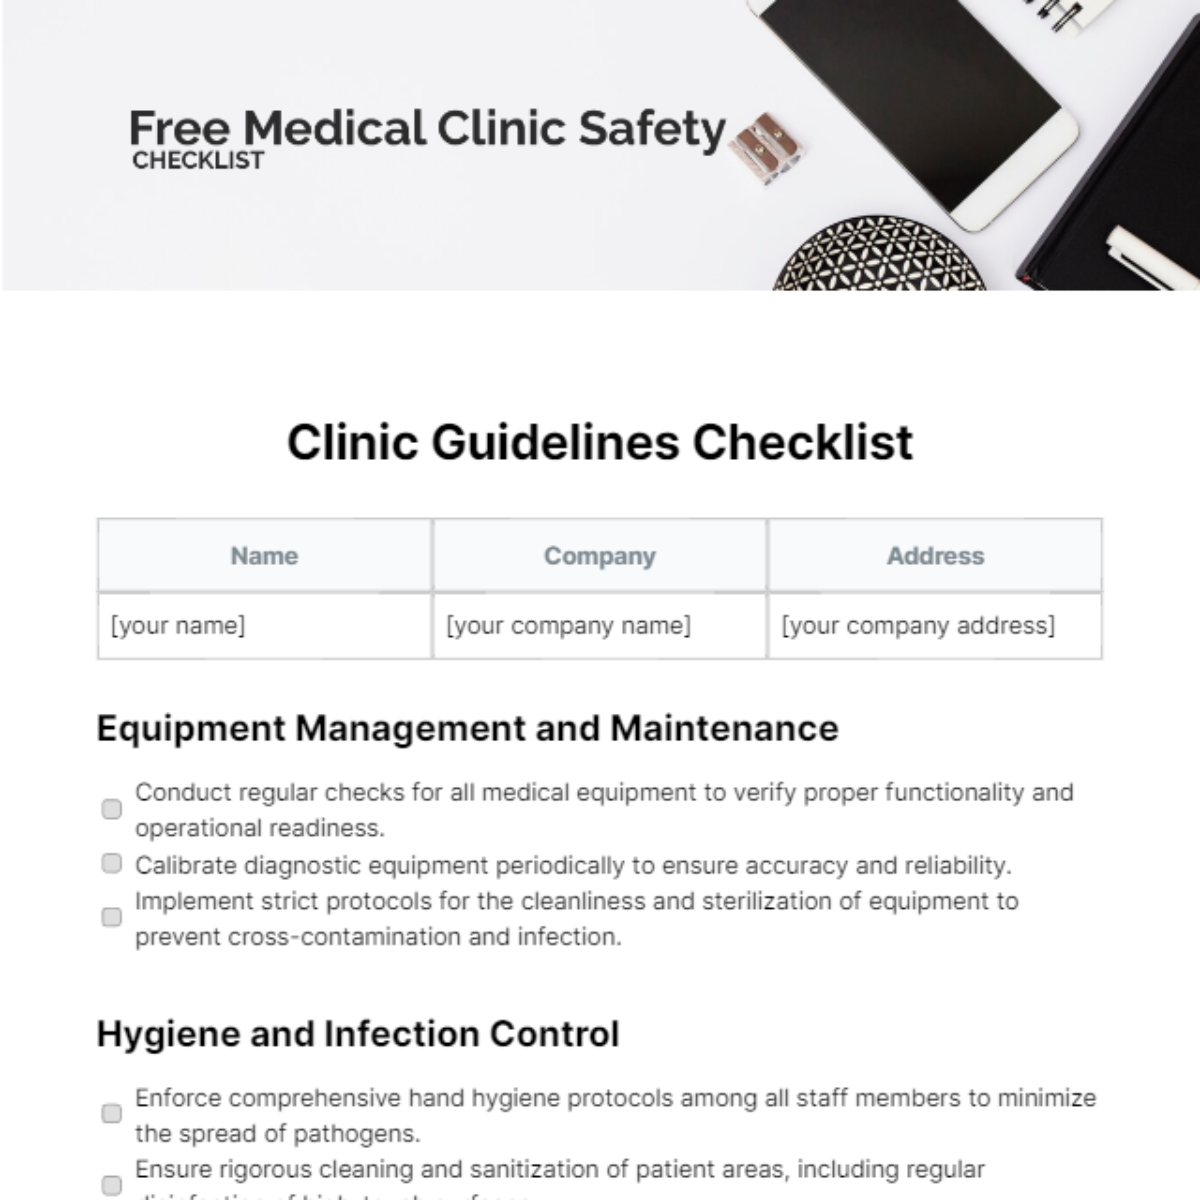 Free Medical Clinic Safety Checklist Template